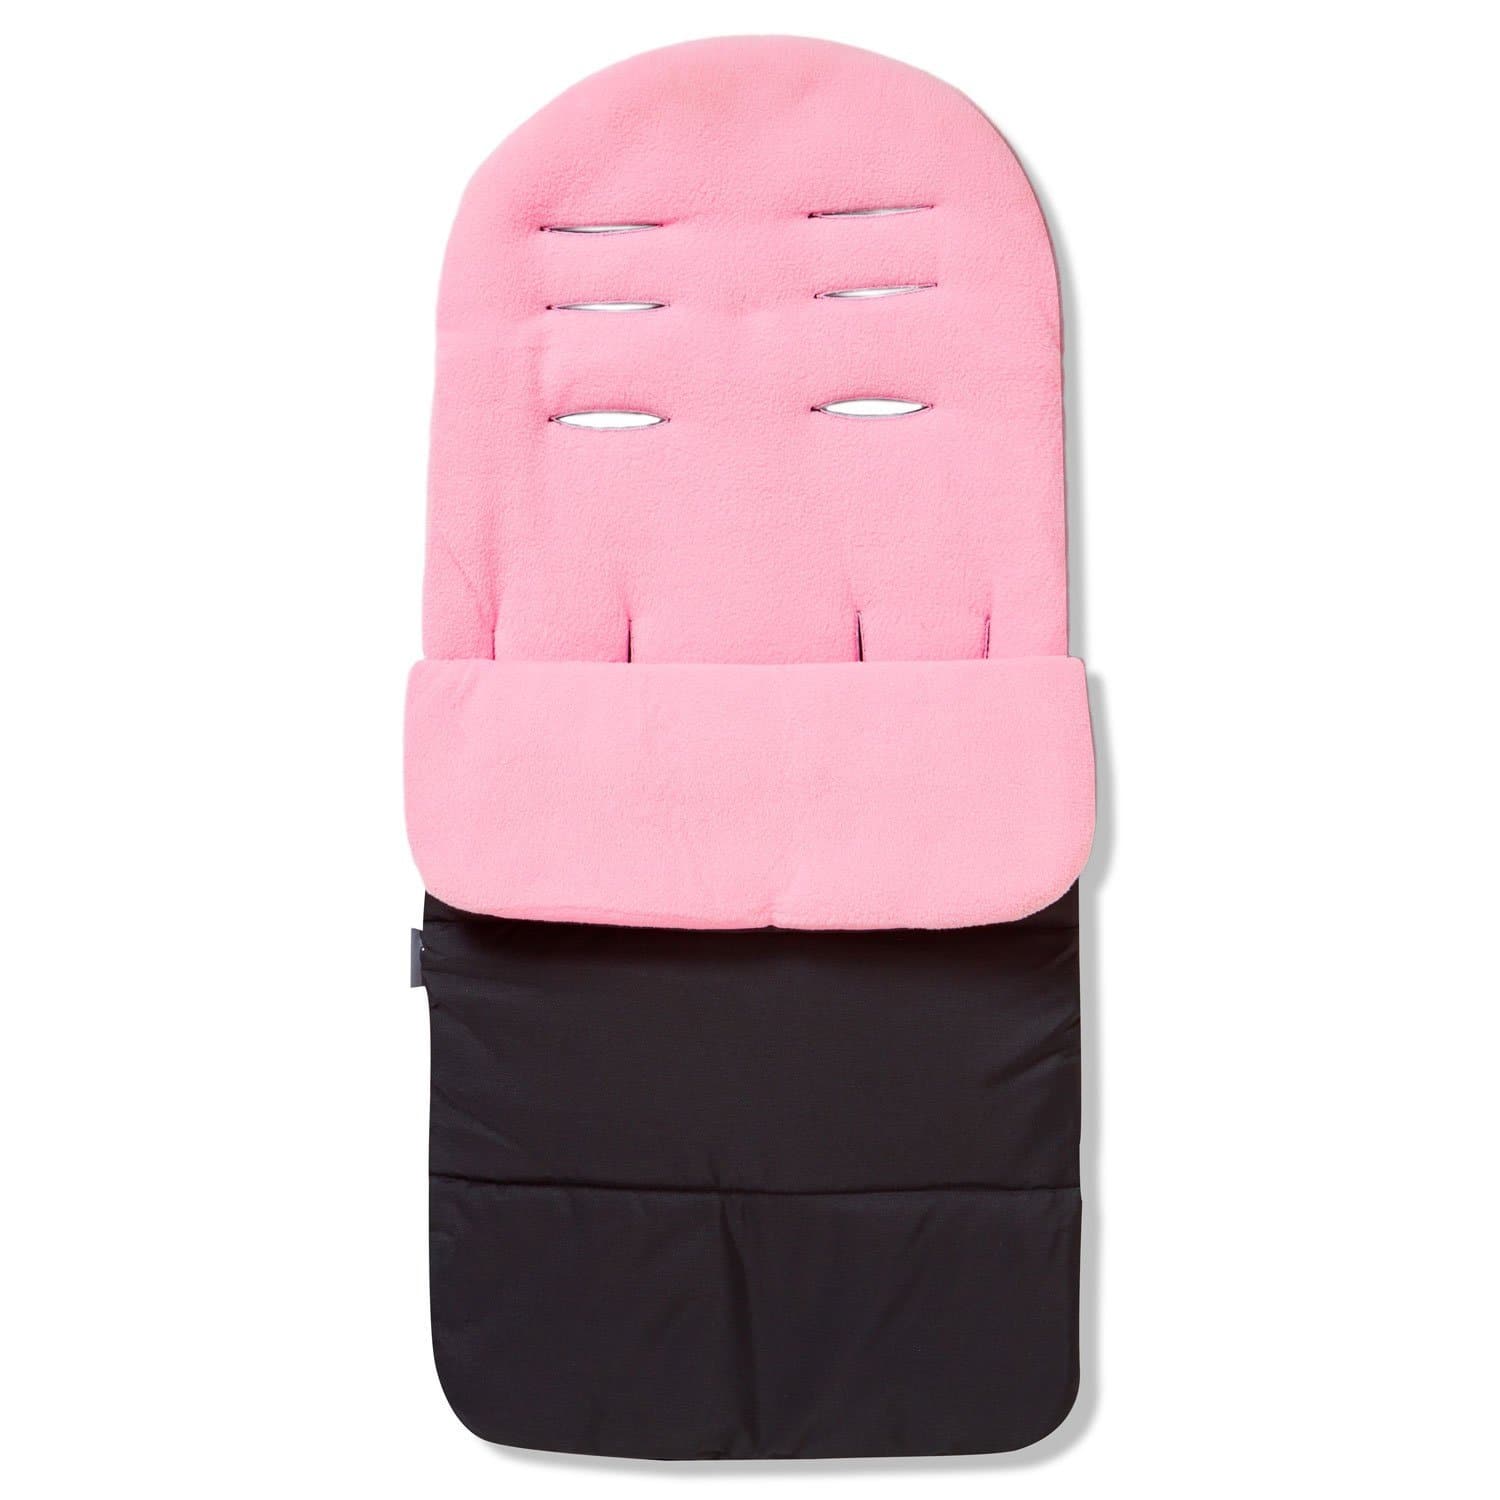 Premium Footmuff / Cosy Toes Compatible with Venicci - Candy Pink / Fits All Models | For Your Little One